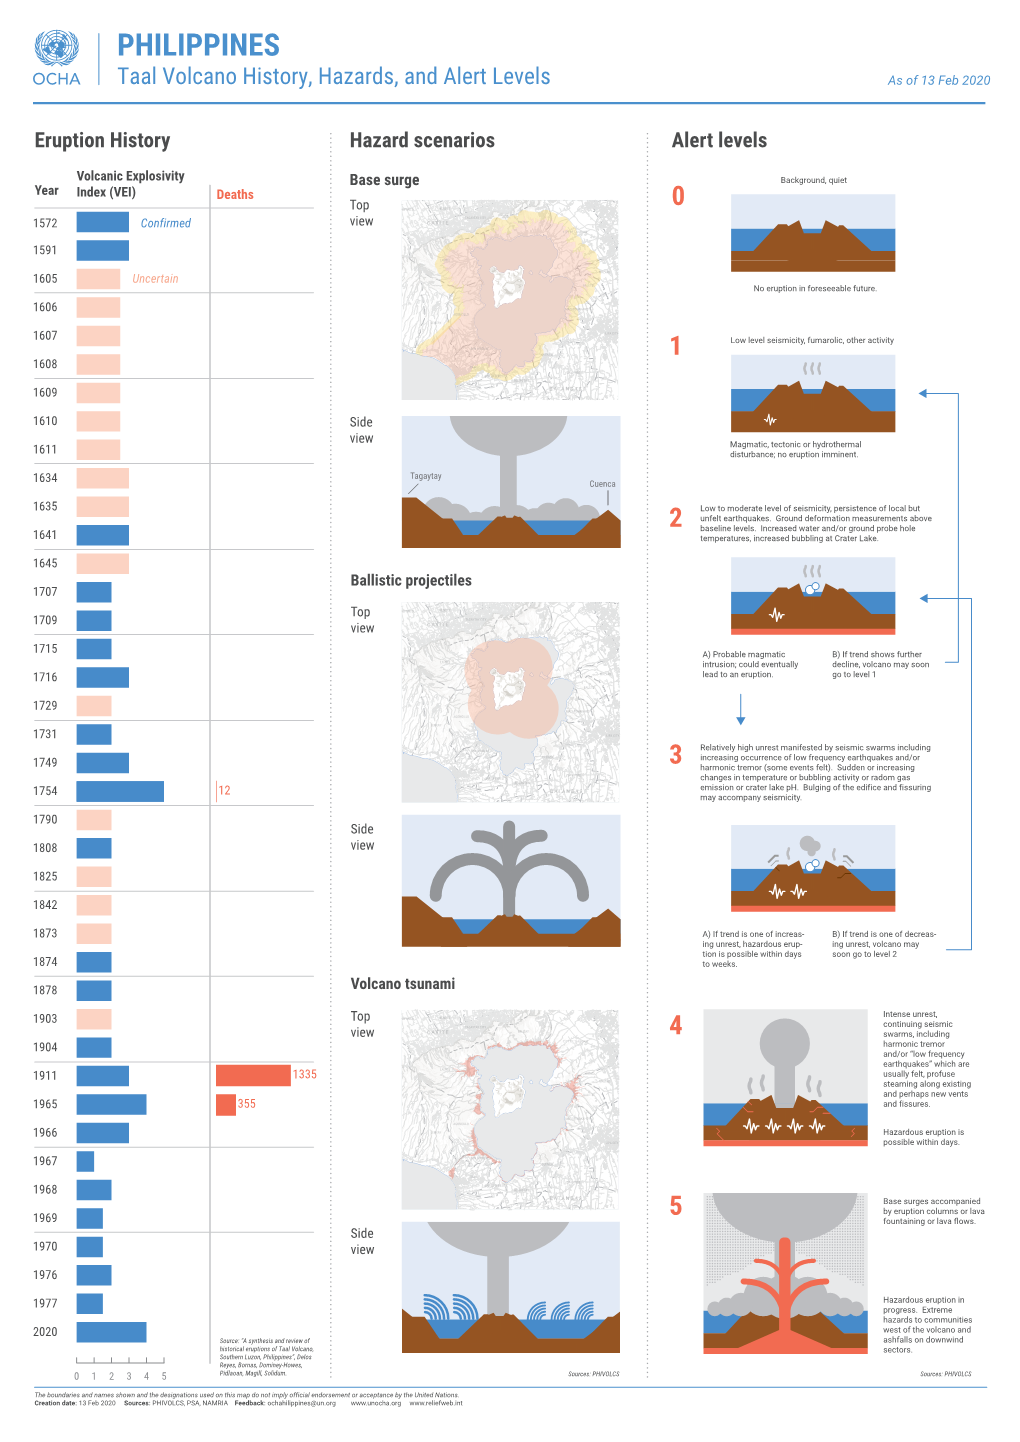 PHILIPPINES Taal Volcano History, Hazards, and Alert Levels As of 13 Feb 2020